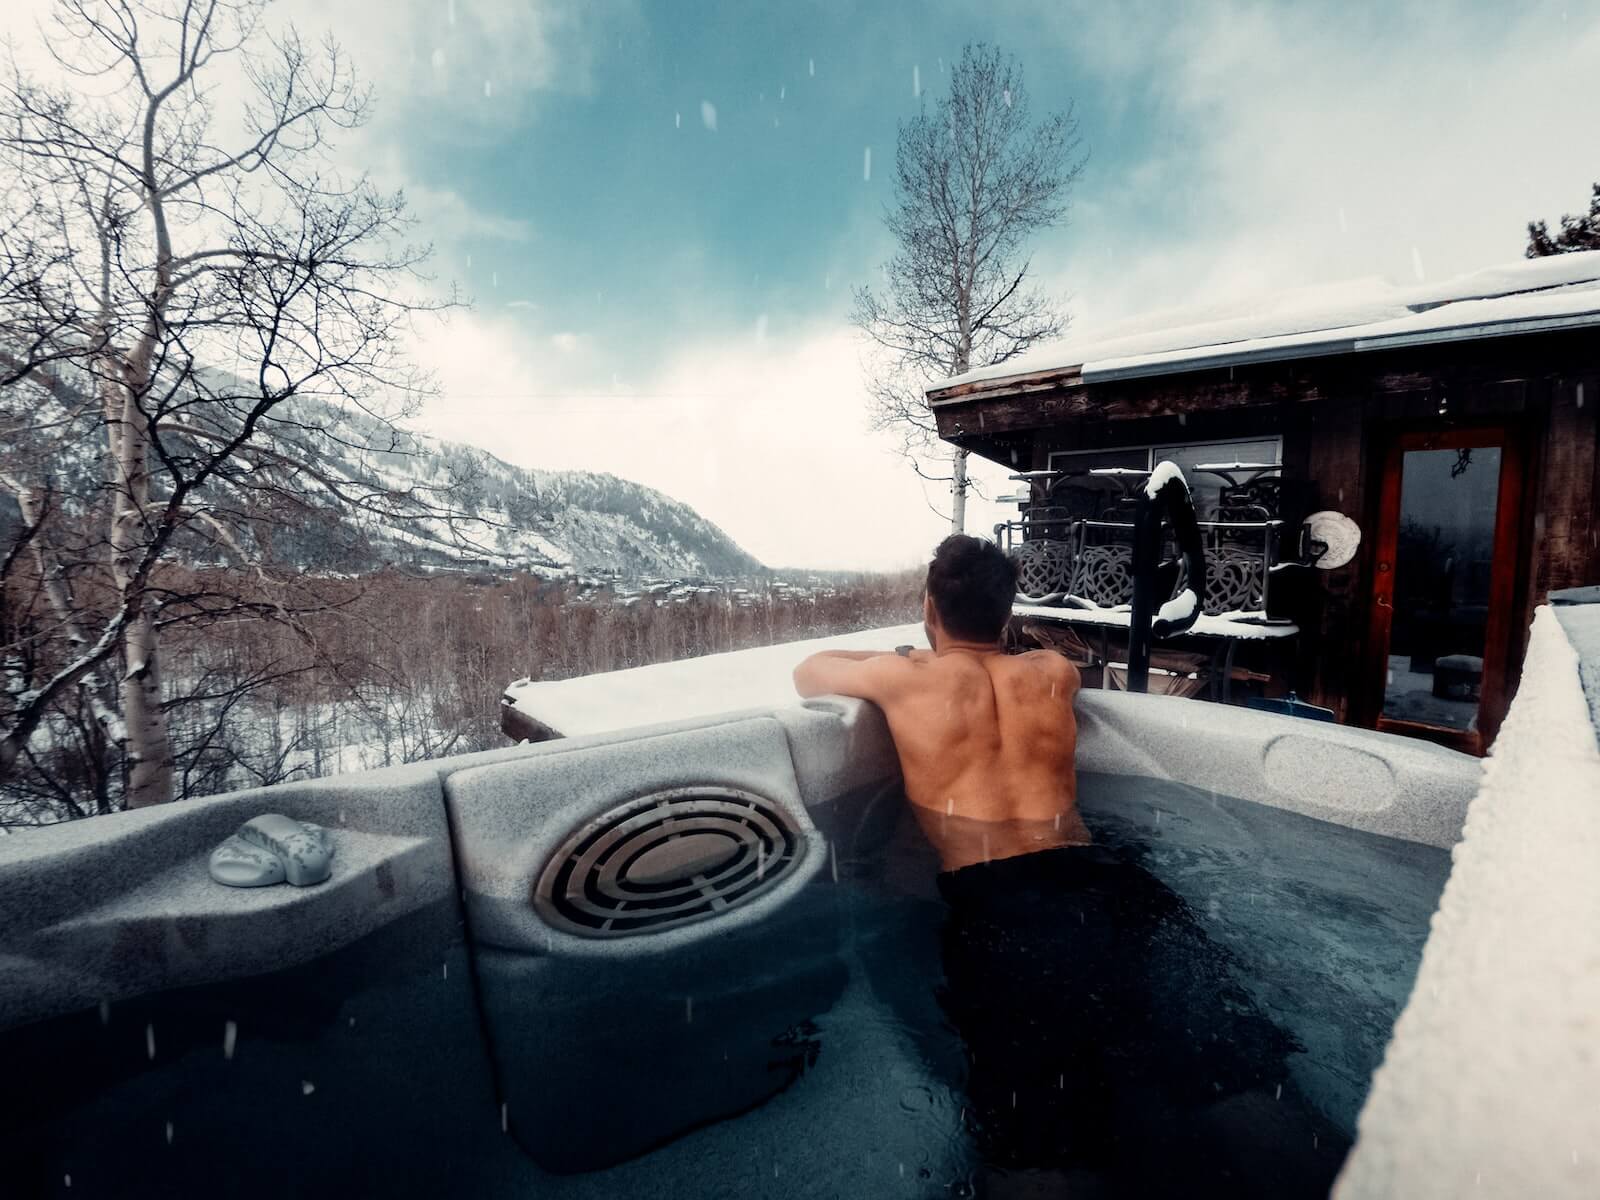 Man in a hot tub during winter